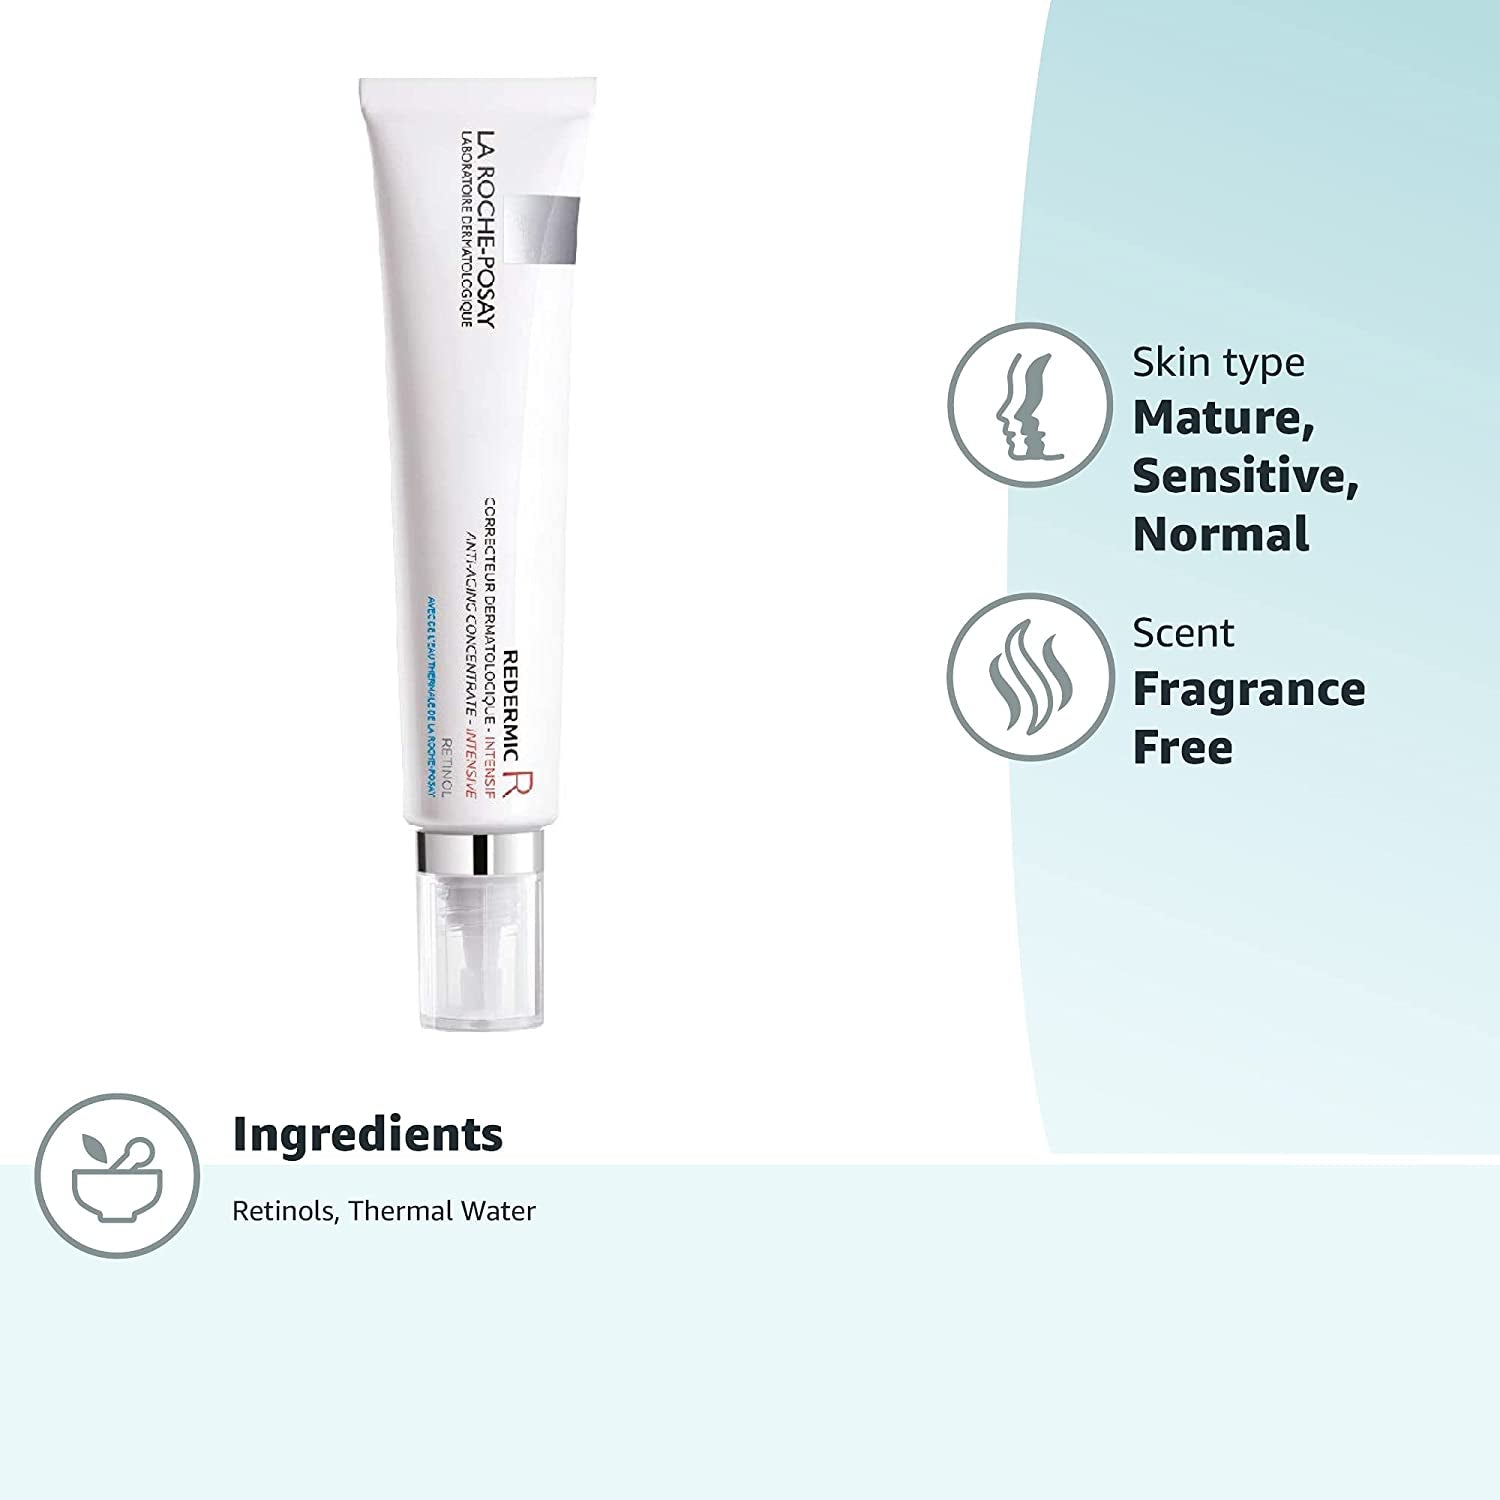 La Roche-Posay Redermic R anti Aging Retinol Cream, Reduces Wrinkles, Fine Lines, and Age Spots with Pure Retinol Face Cream, 1 Fl Oz - Free & Fast Delivery